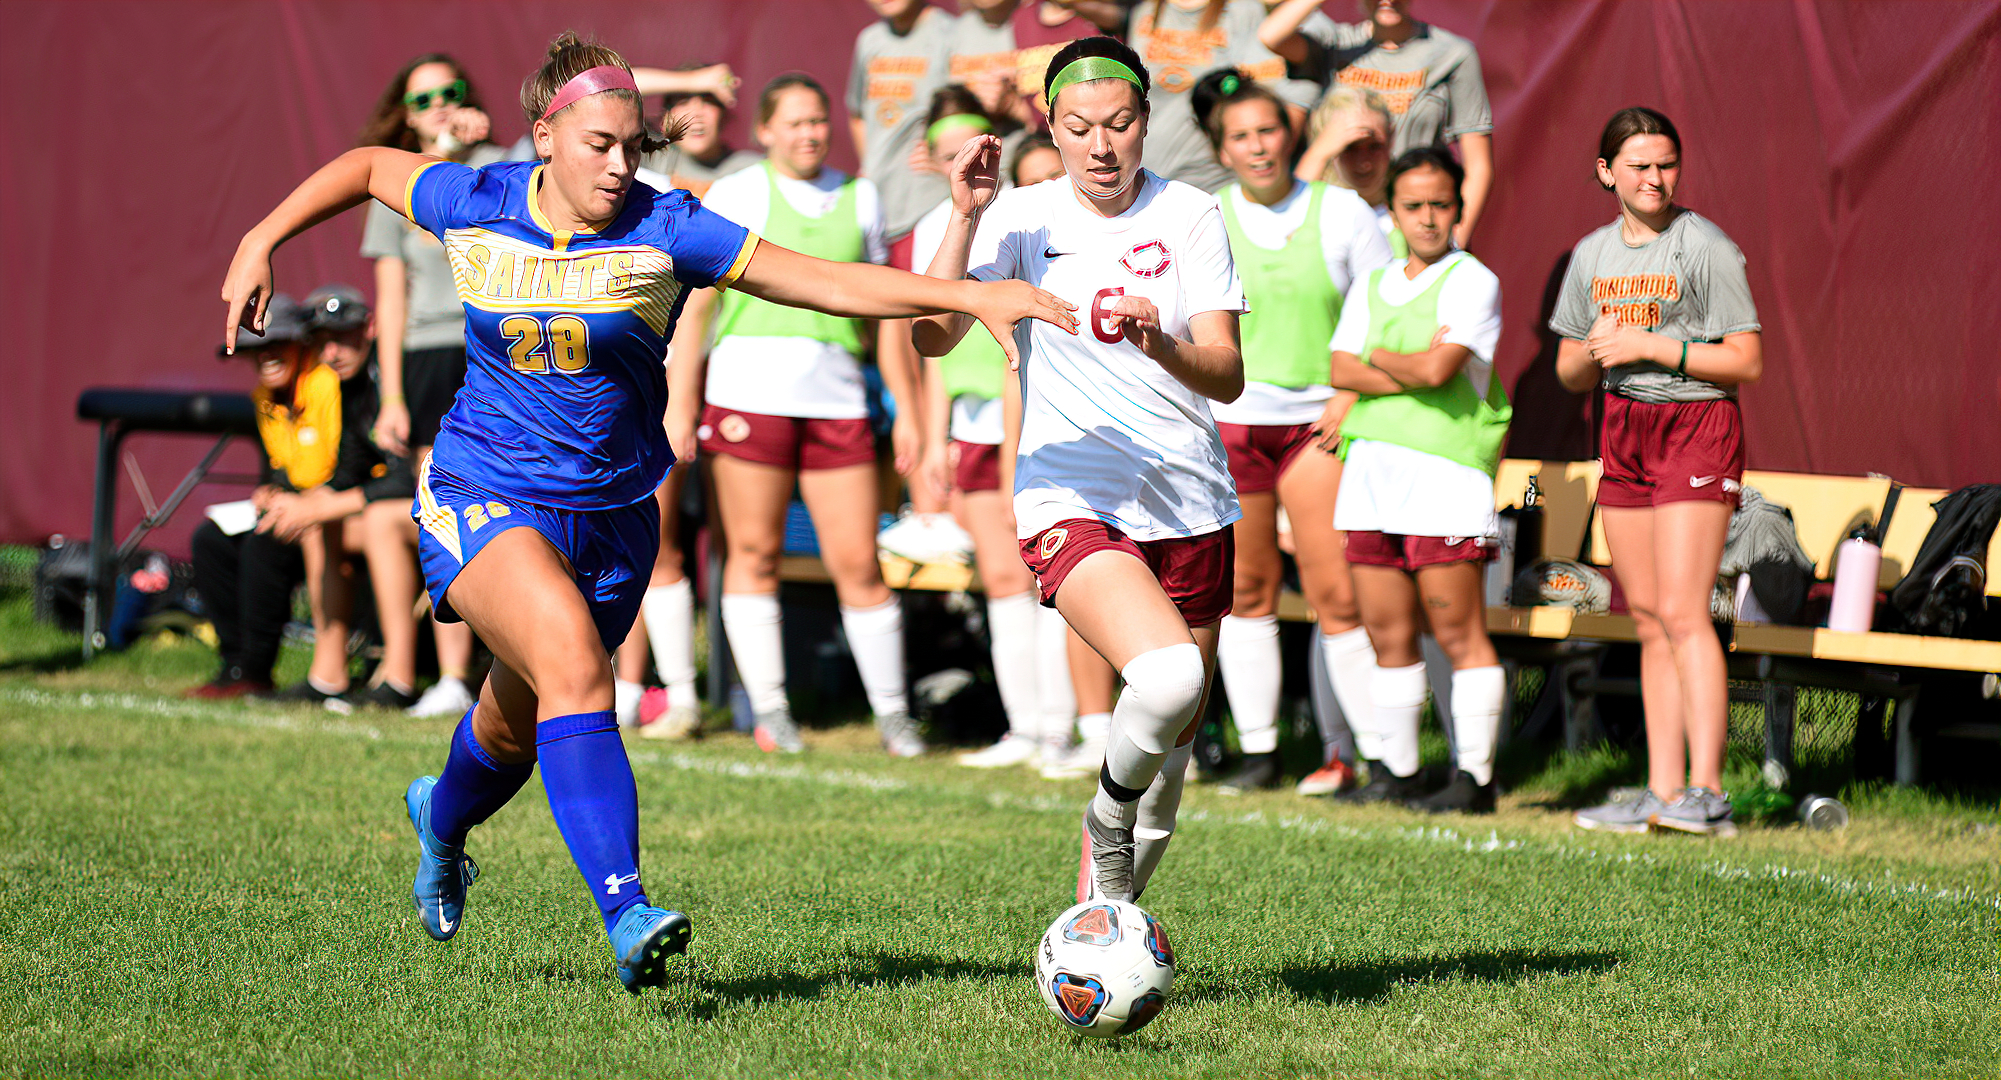 Sammy Holmberg races up the sideline in the first half of the Cobbers' game with St. Scholastica. She scored her team-leading fourth goal of the year.